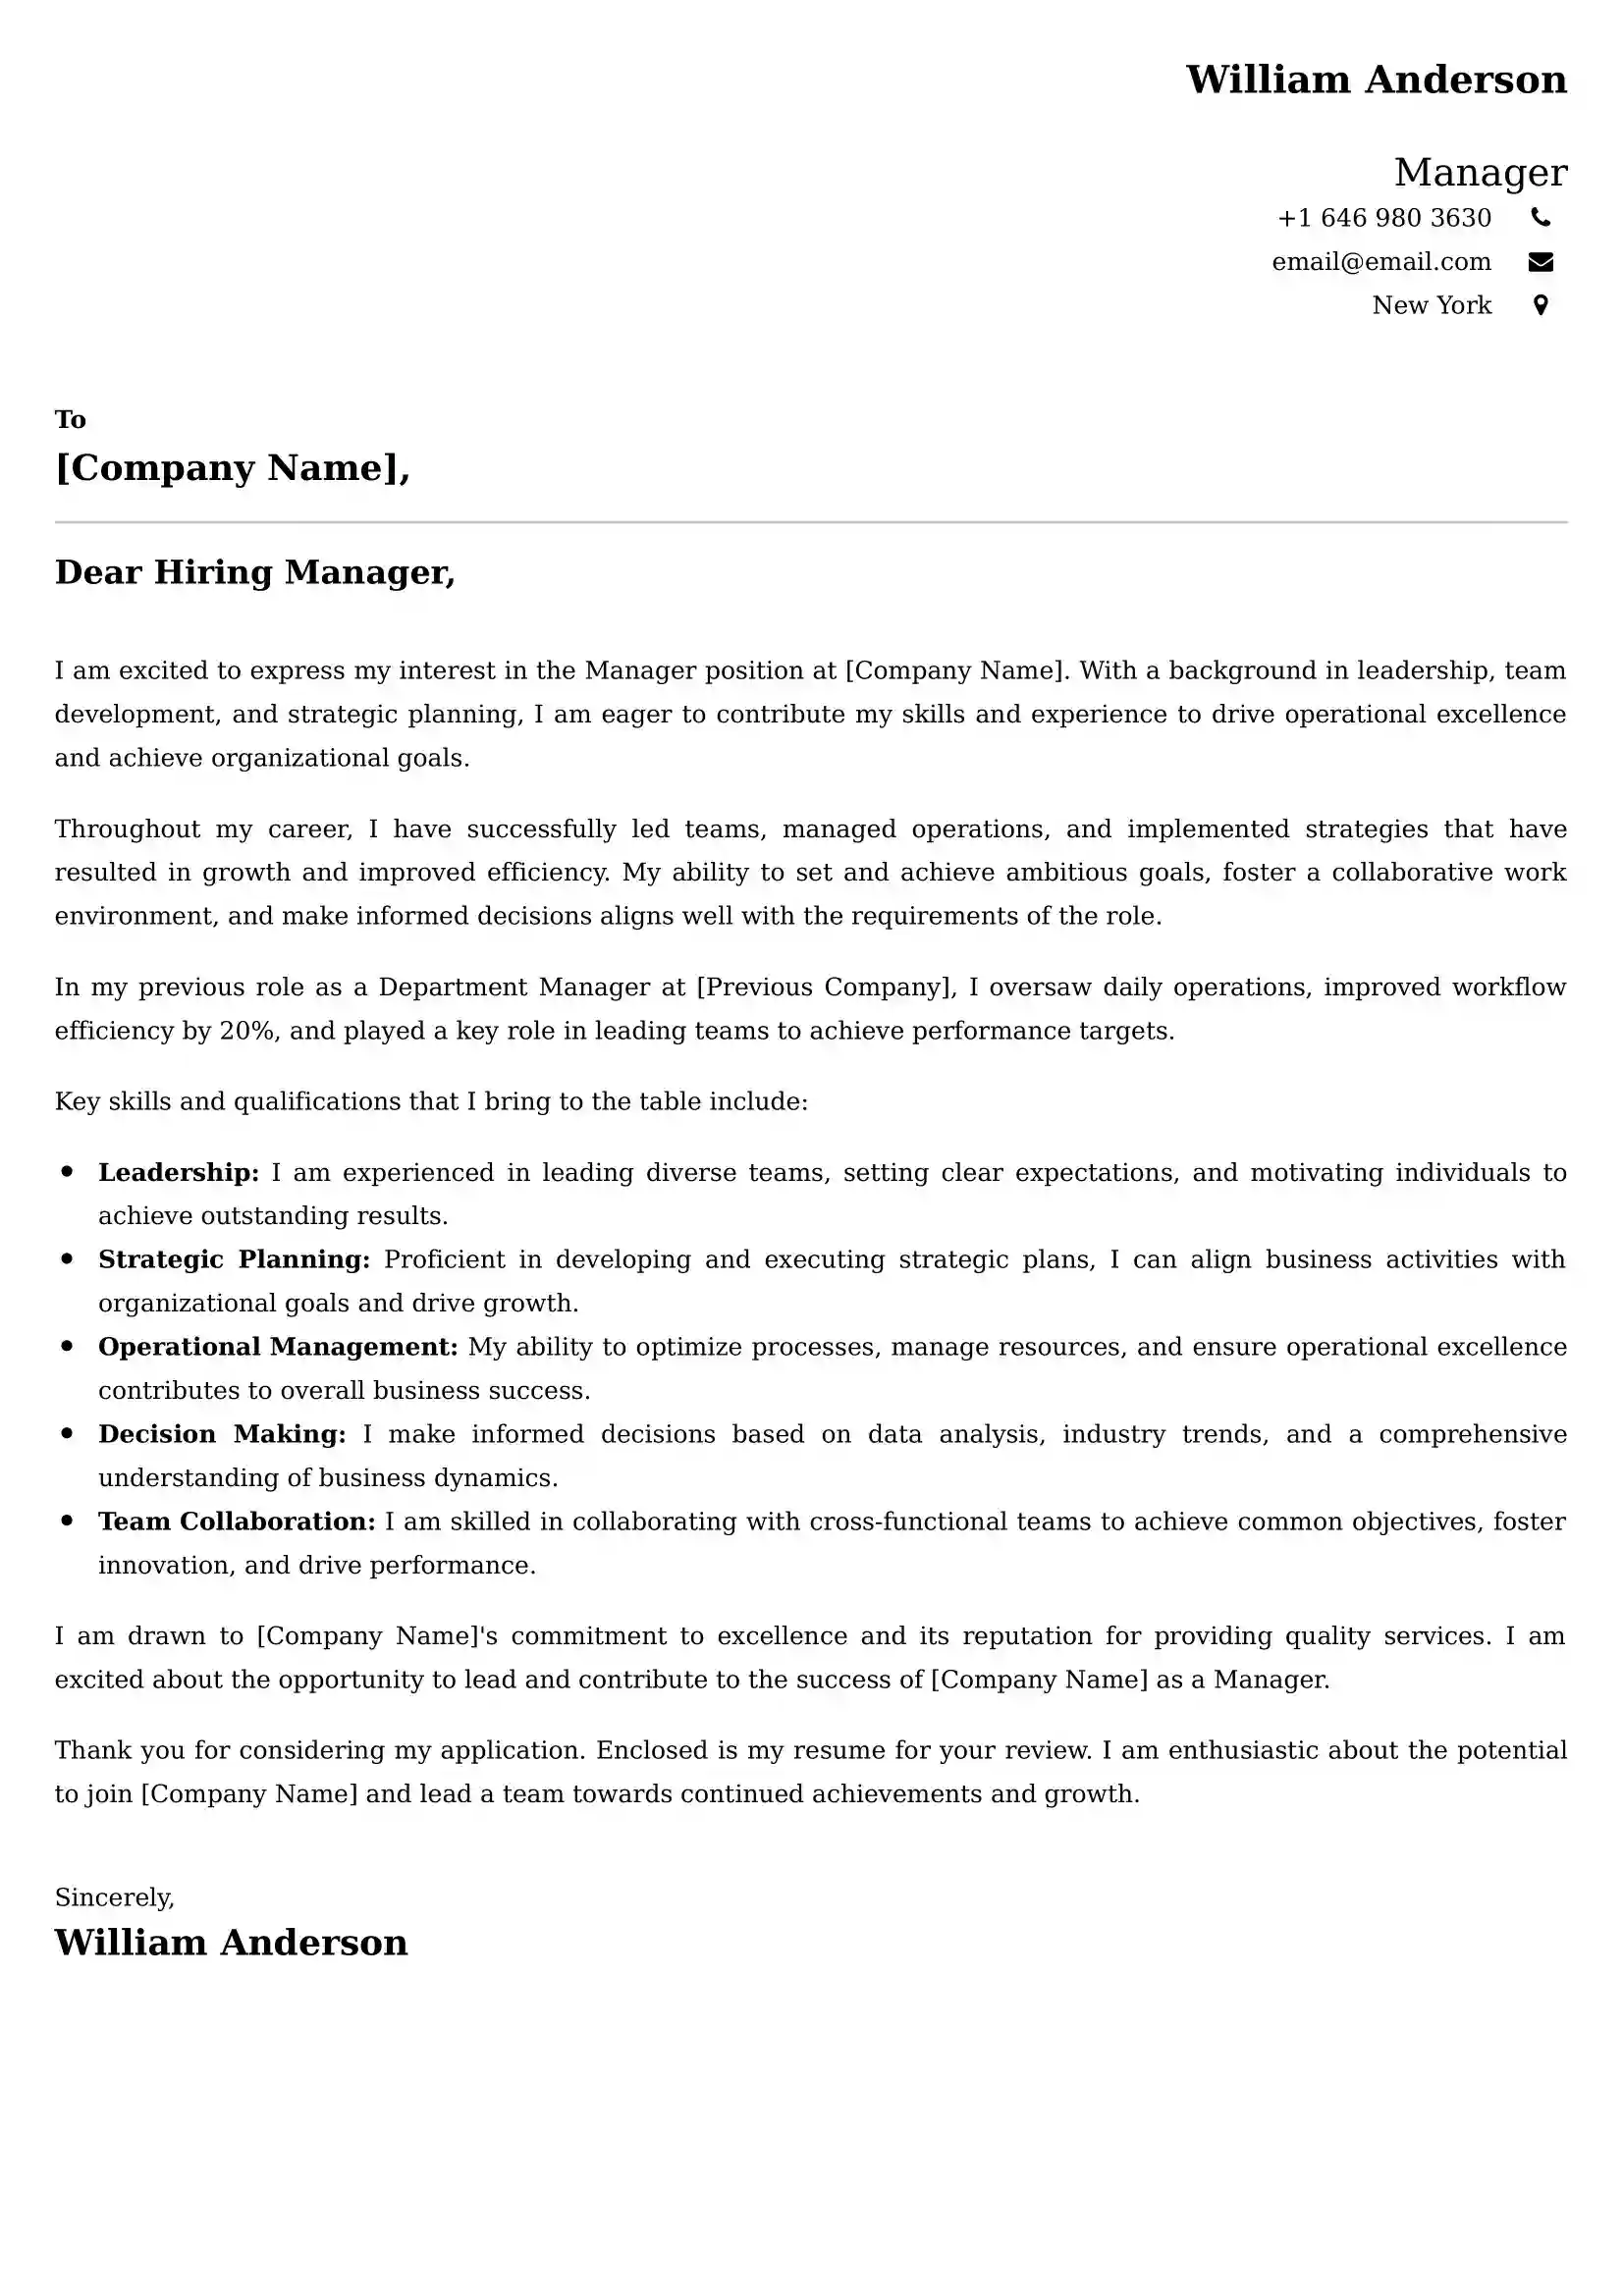 Manager Cover Letter Examples UAE - ATS Format